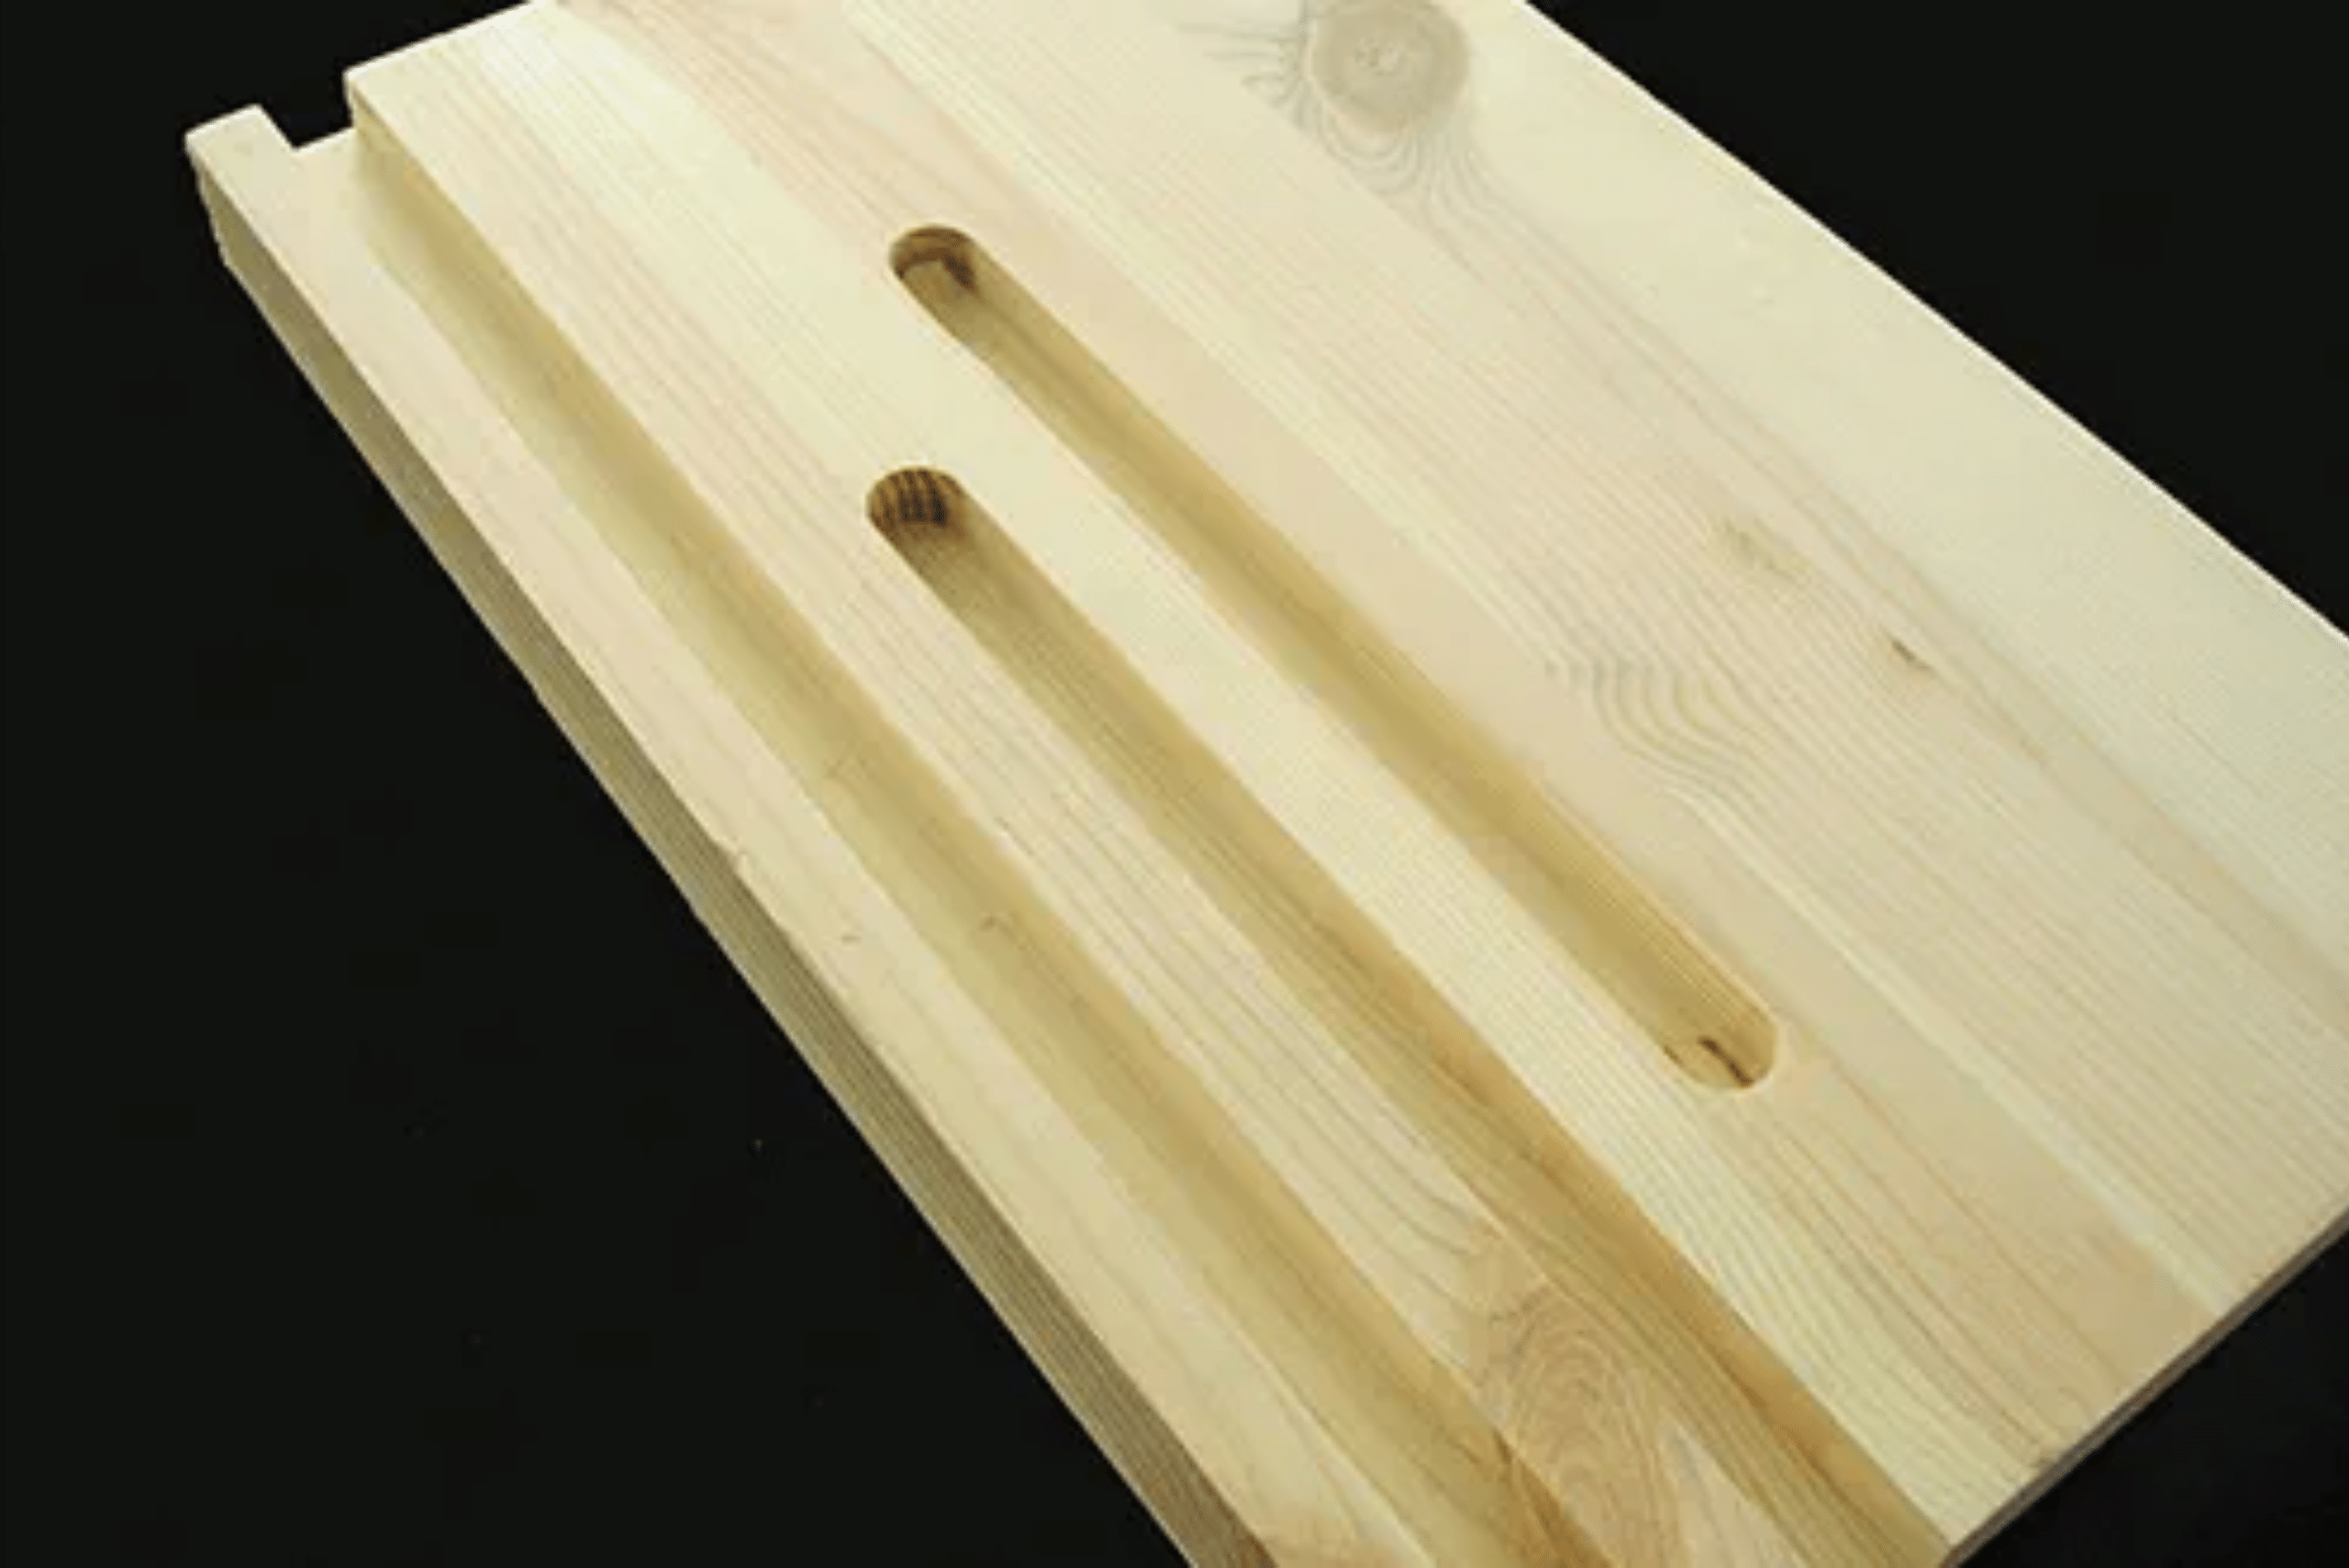 A wooden board with grooves router cuts.